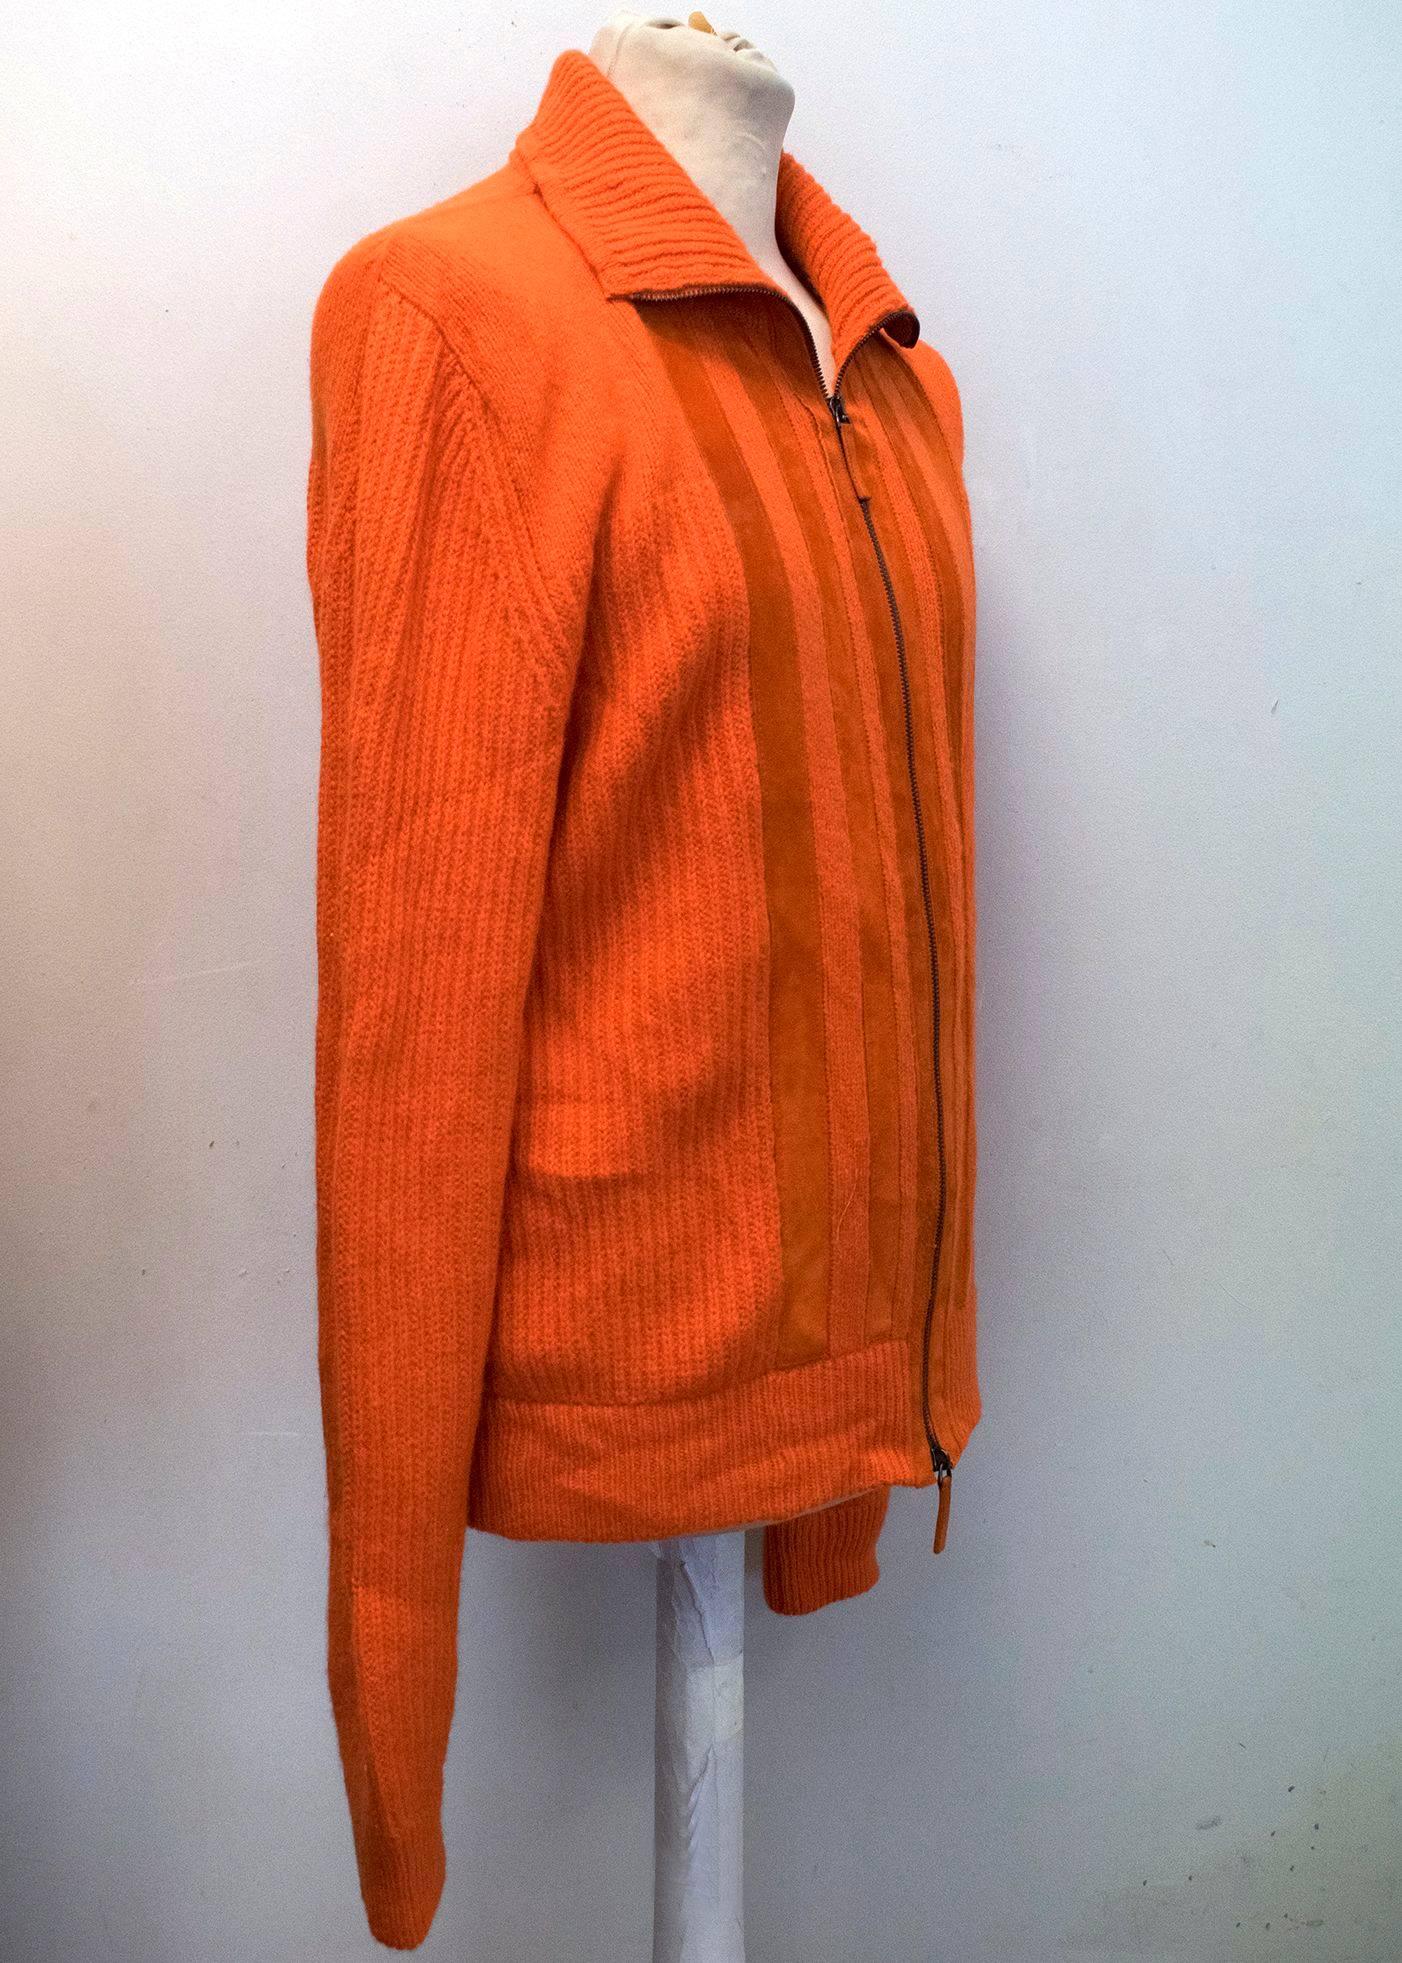 Bottega Veneta orange cashmere and leather cardigan with a zip up front. 
Leather panels either side of the zip and a high neck collar. 

Condition 10/10

Size EU: 48
Size UK: 38

Measurements Approx:
Length -69cm 
Shoulder - 46cm
Sleeves -79cm 